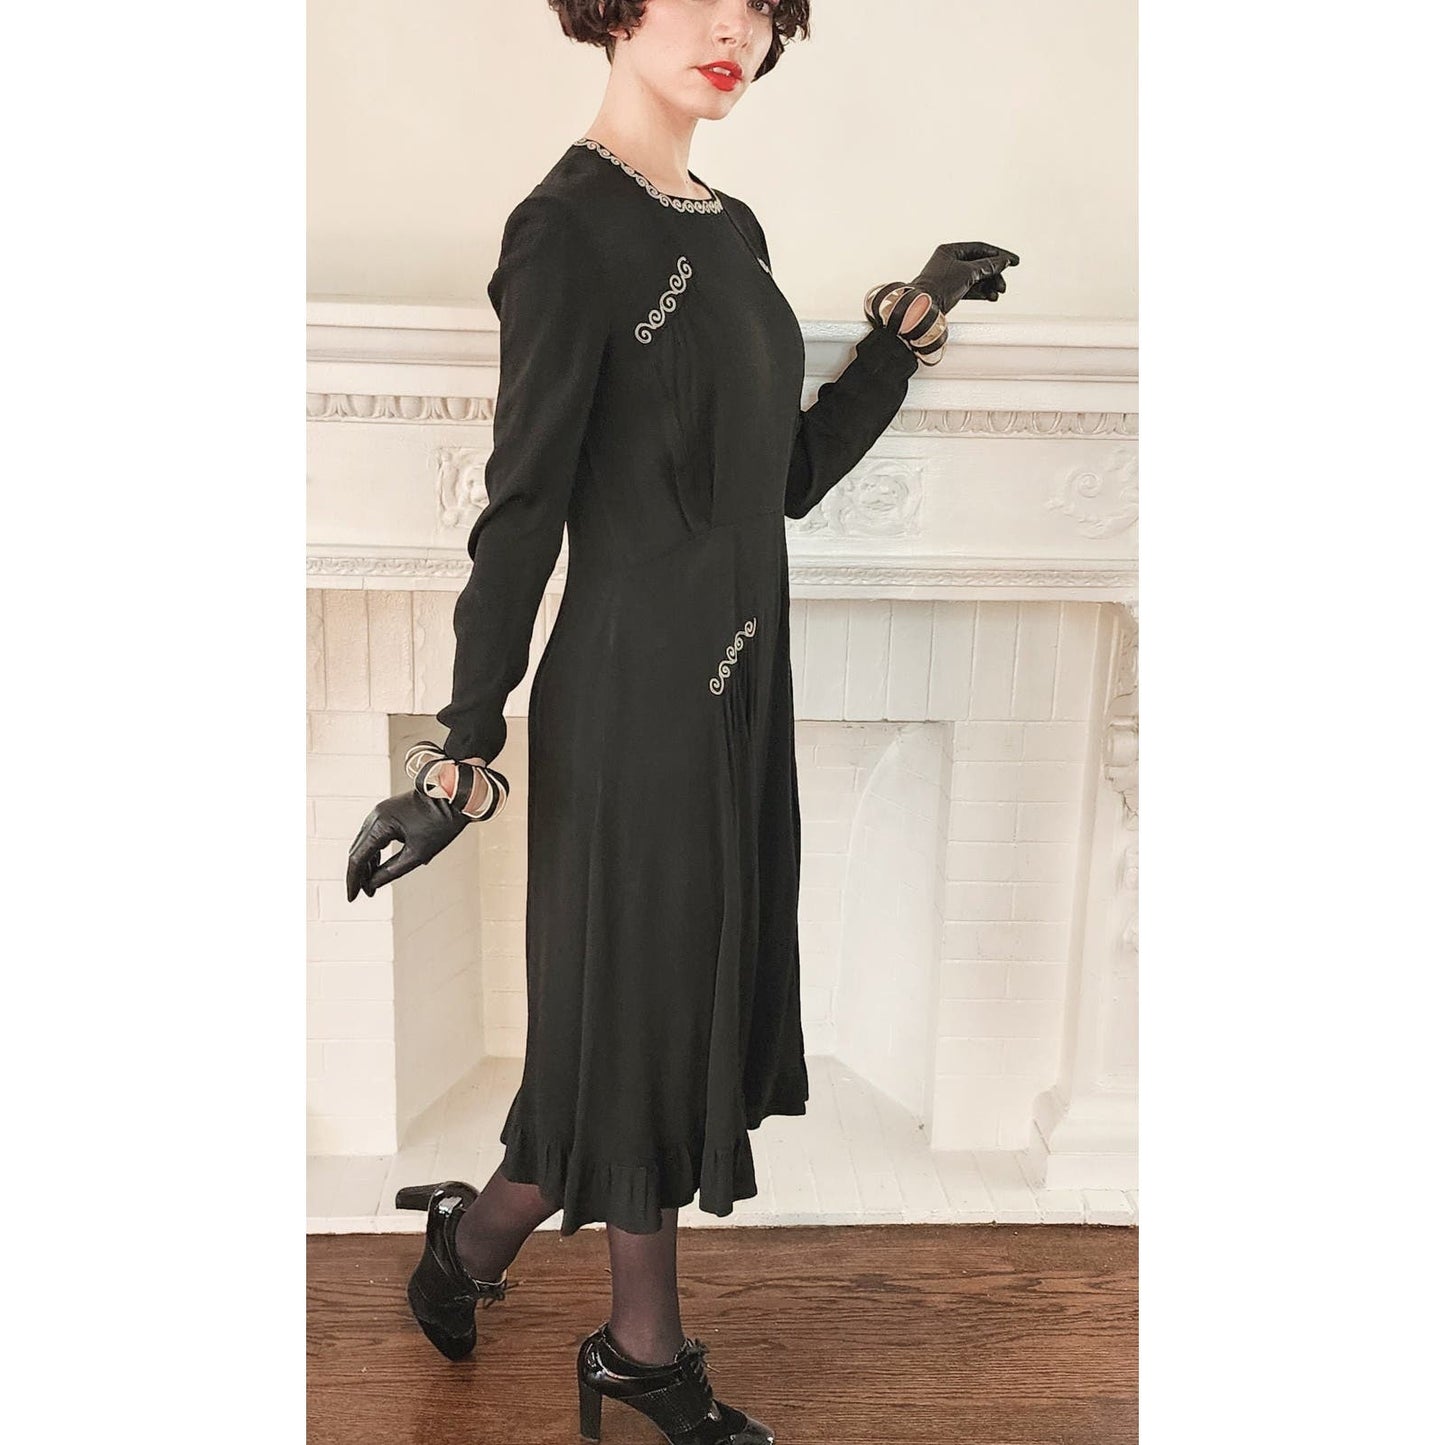 Vintage 40s Black Rayon Cocktail Dress with Cream Embroidery Medium